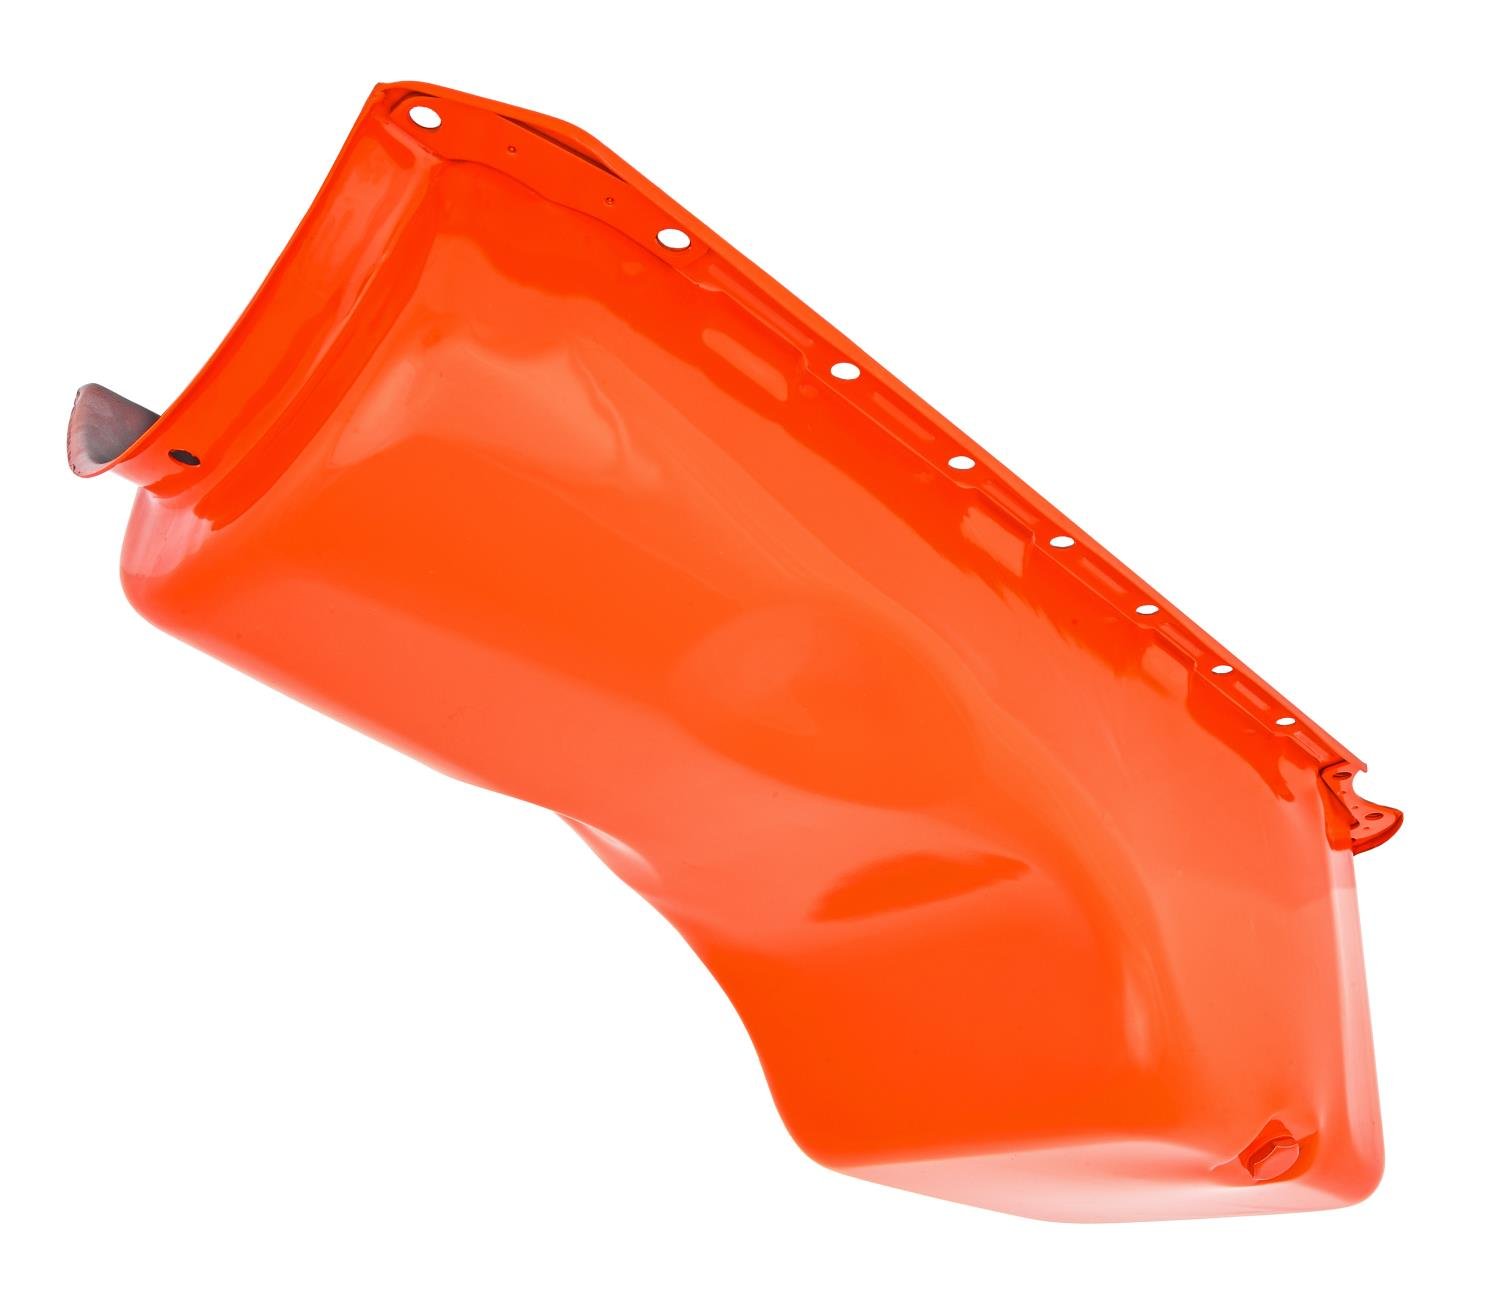 Stock-Style Replacement Oil Pan for 1965-1990 Big Block Chevy Mark IV [Orange Finish]